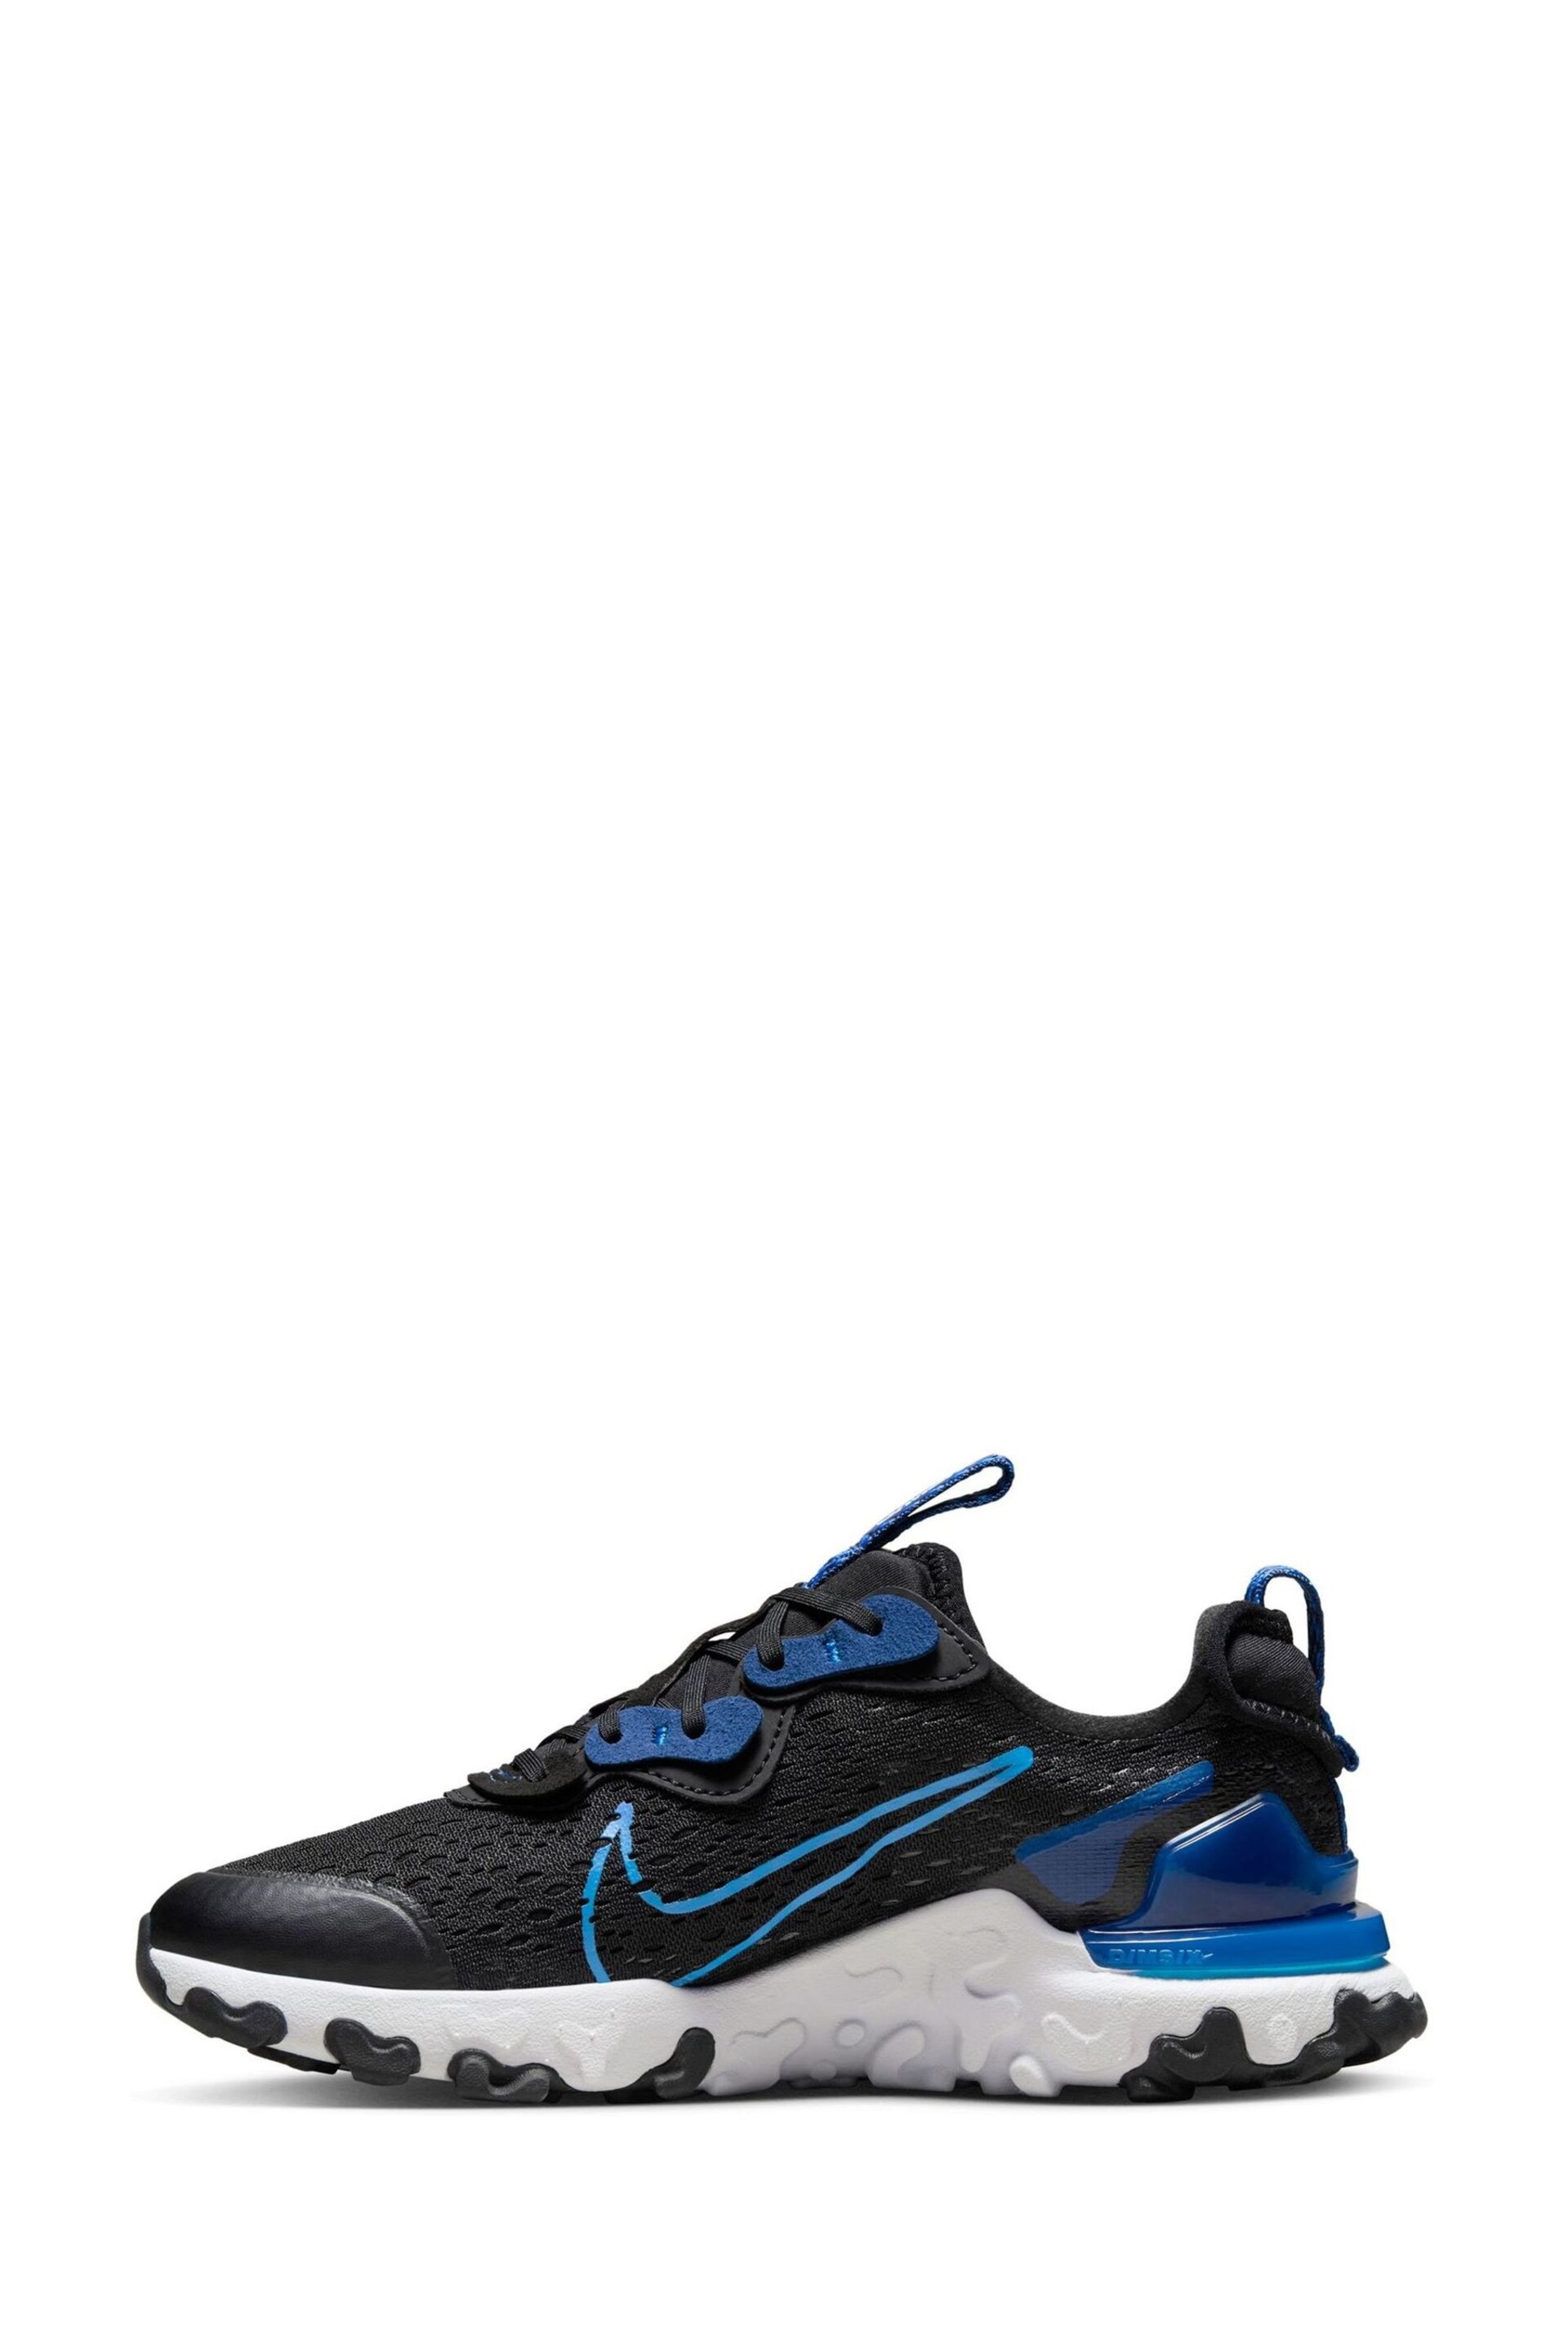 Nike Black/Navy React Vision Youth Trainers - Image 4 of 10